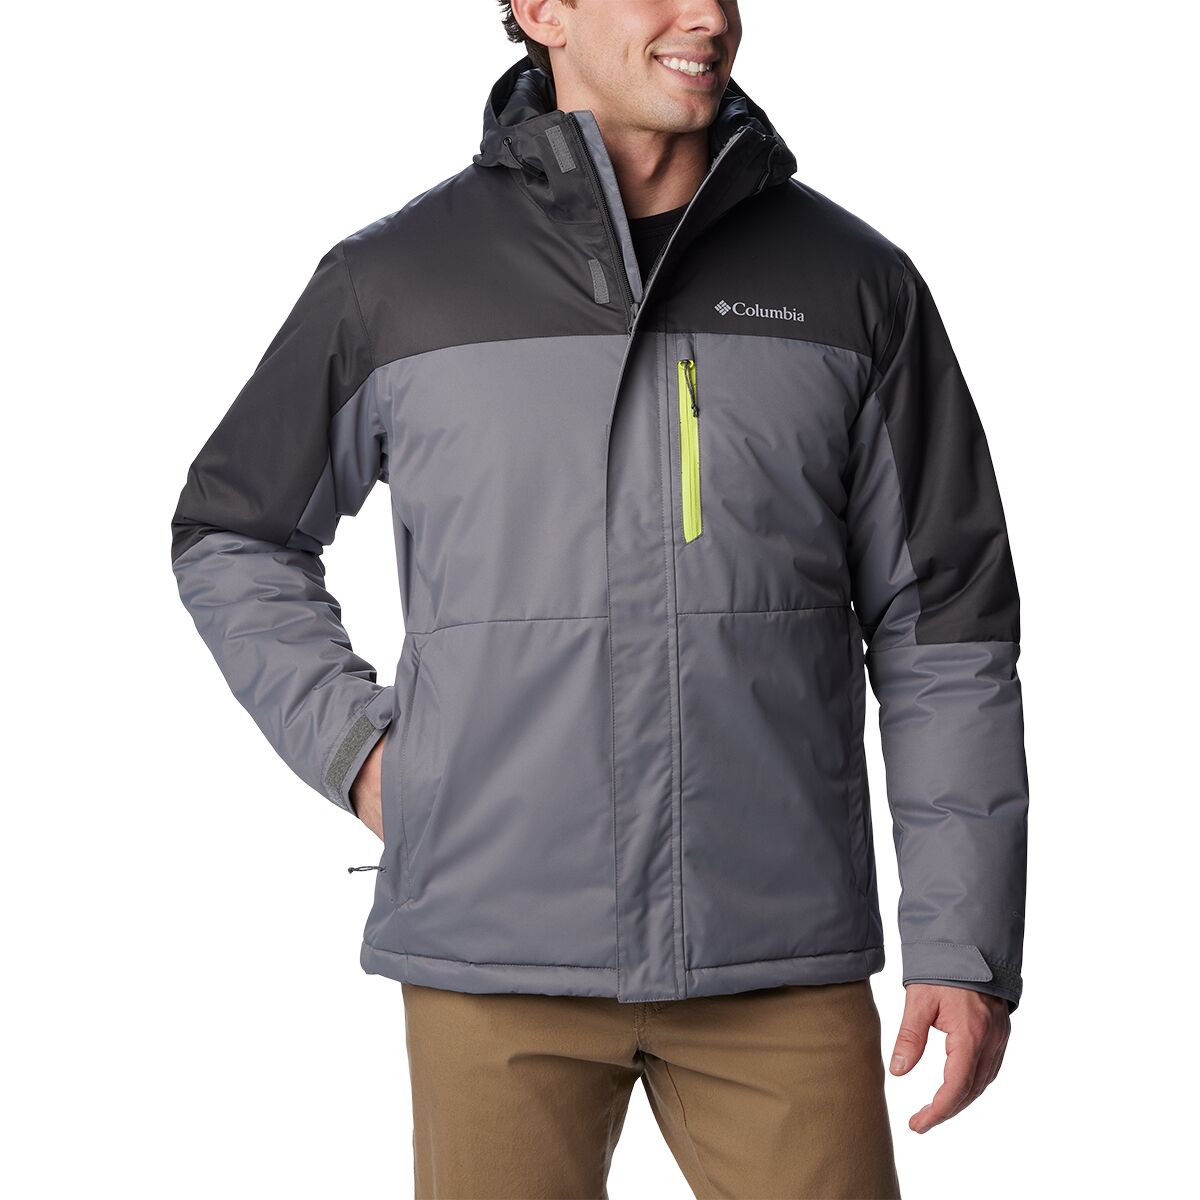 Columbia Hikebound Insulated Jacket - Men's - Clothing